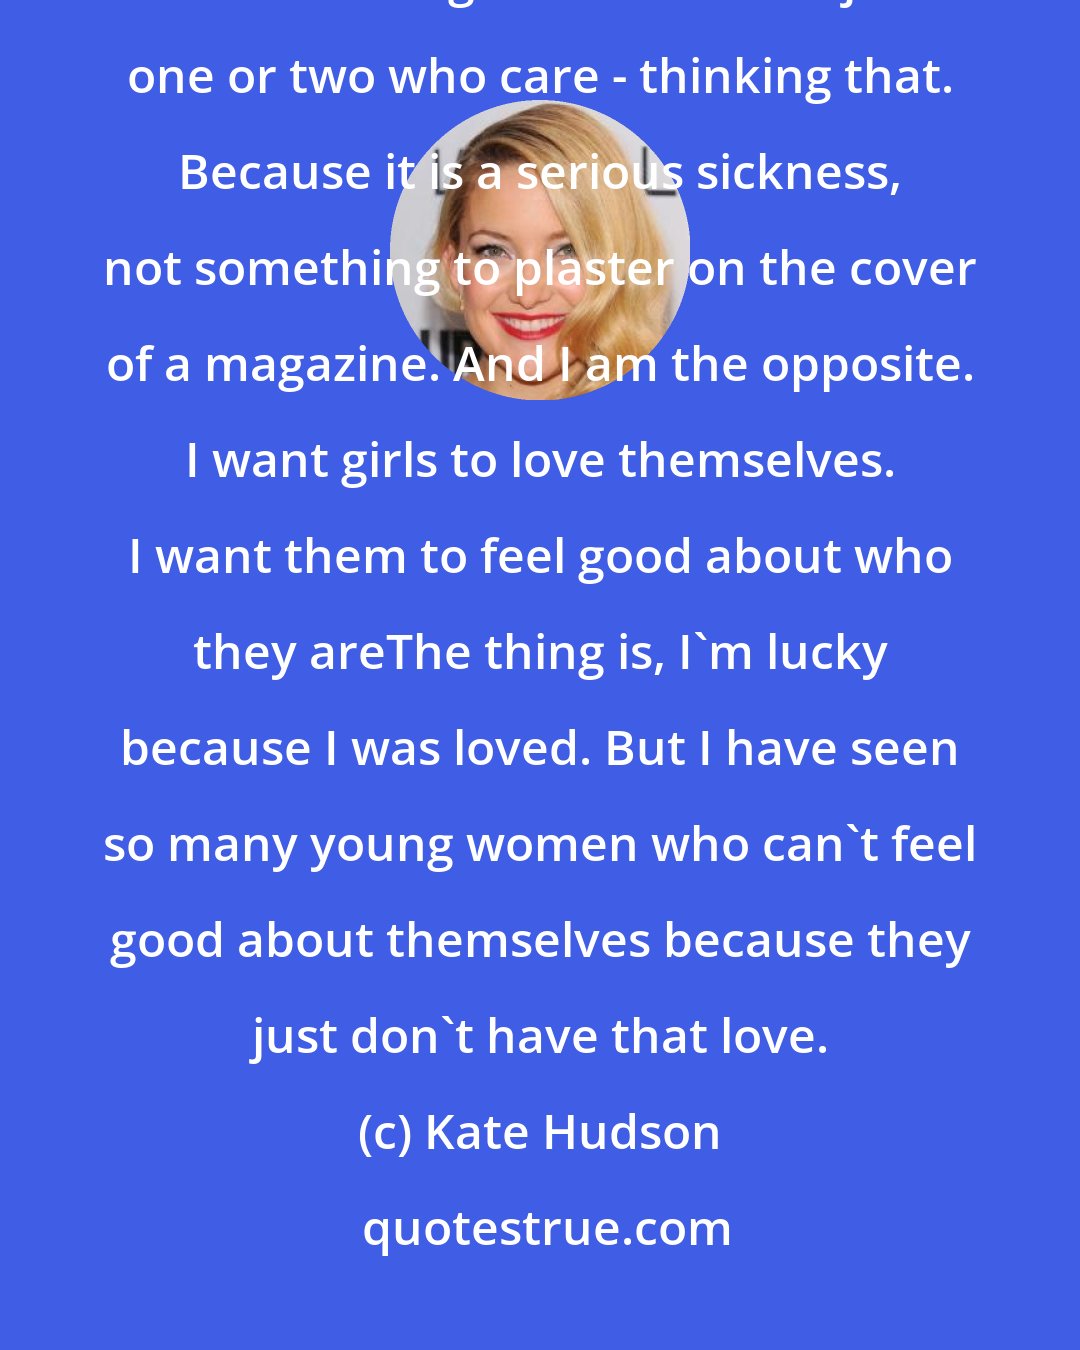 Kate Hudson: If there is one thing I will never have, it is an eating disorder. I won't have girls - even if it is just one or two who care - thinking that. Because it is a serious sickness, not something to plaster on the cover of a magazine. And I am the opposite. I want girls to love themselves. I want them to feel good about who they areThe thing is, I'm lucky because I was loved. But I have seen so many young women who can't feel good about themselves because they just don't have that love.